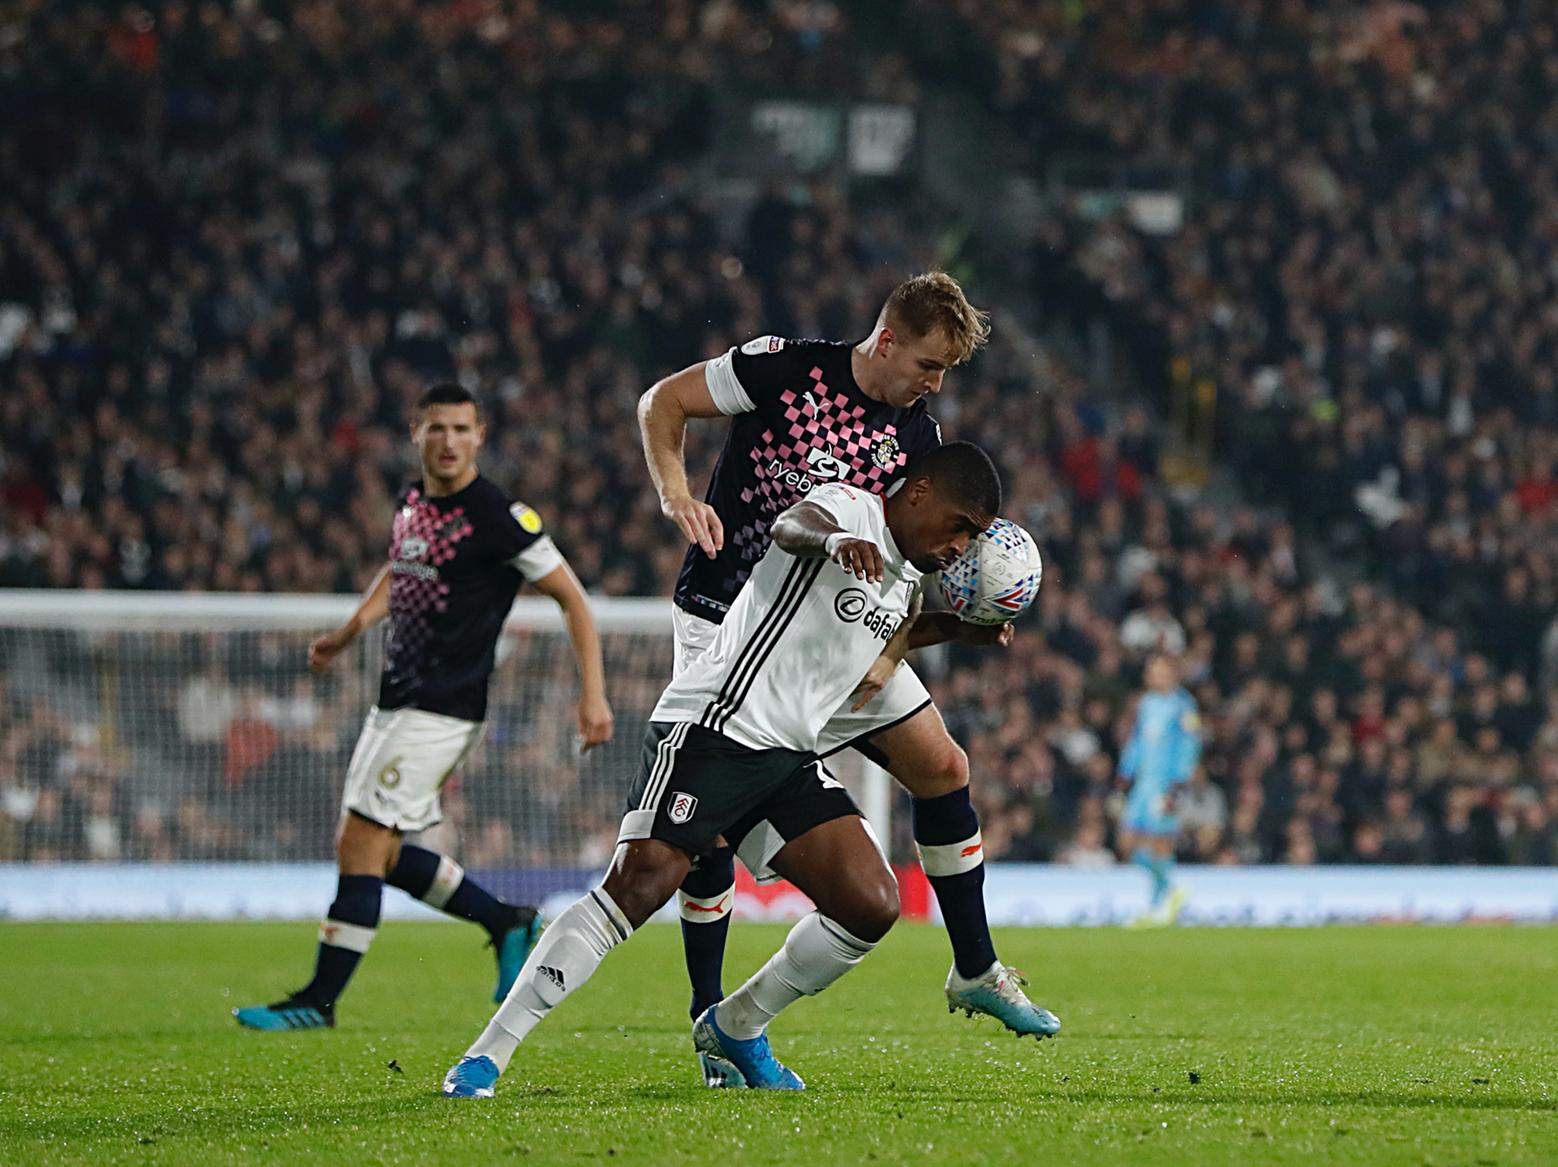 Few errors during the opening 45 minutes saw Fulham able to win possession back and mount some attacks on the left flank. Found Cavaleiro a tricky proposition as no doubt many will do this year. Replaced by Bolton.